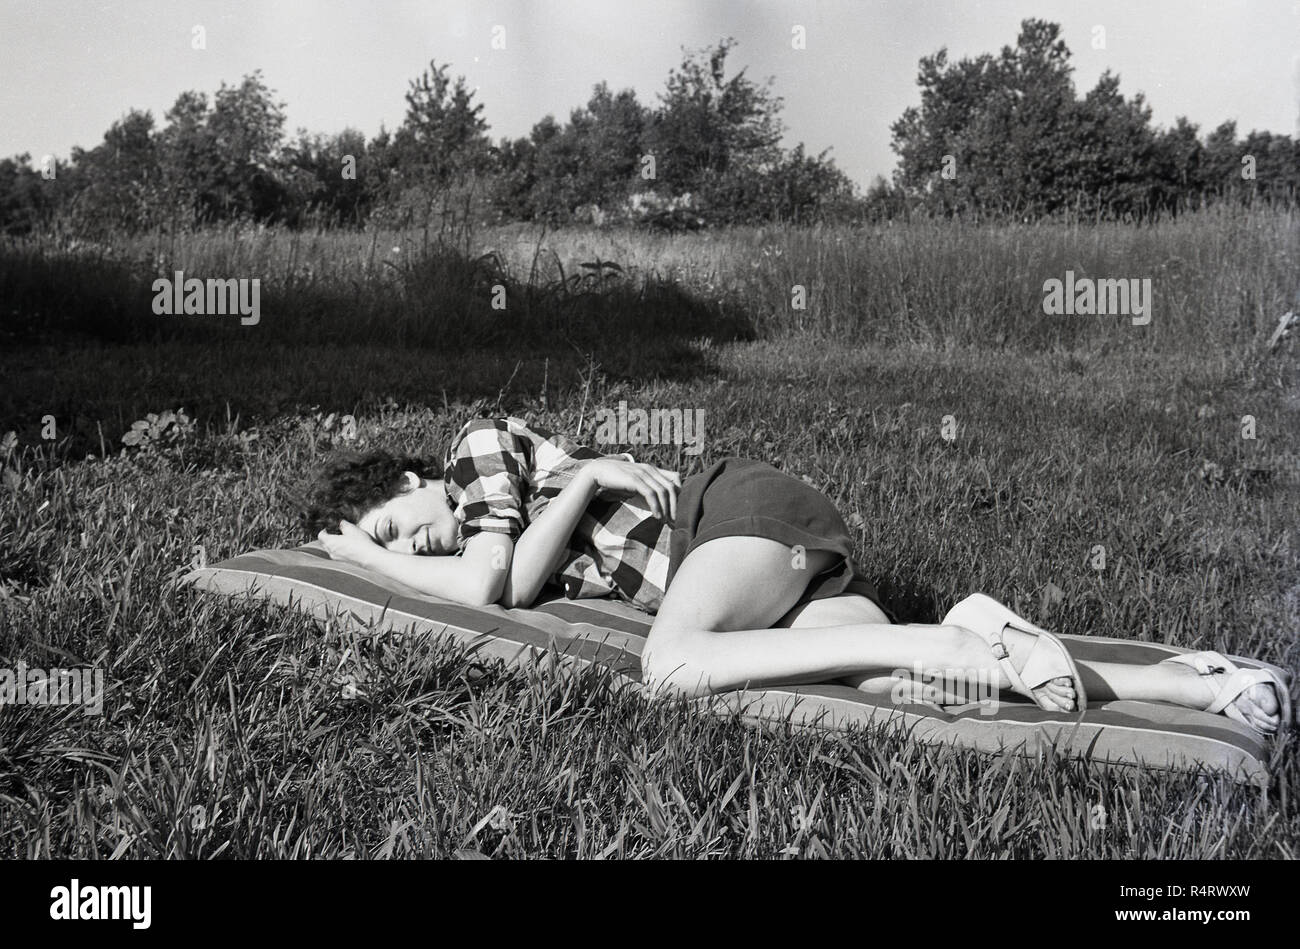 1960s, historical, summertime and outside in a grassy field, a lady lying down on an air bed or lylo relaxing, England, UK. Stock Photo